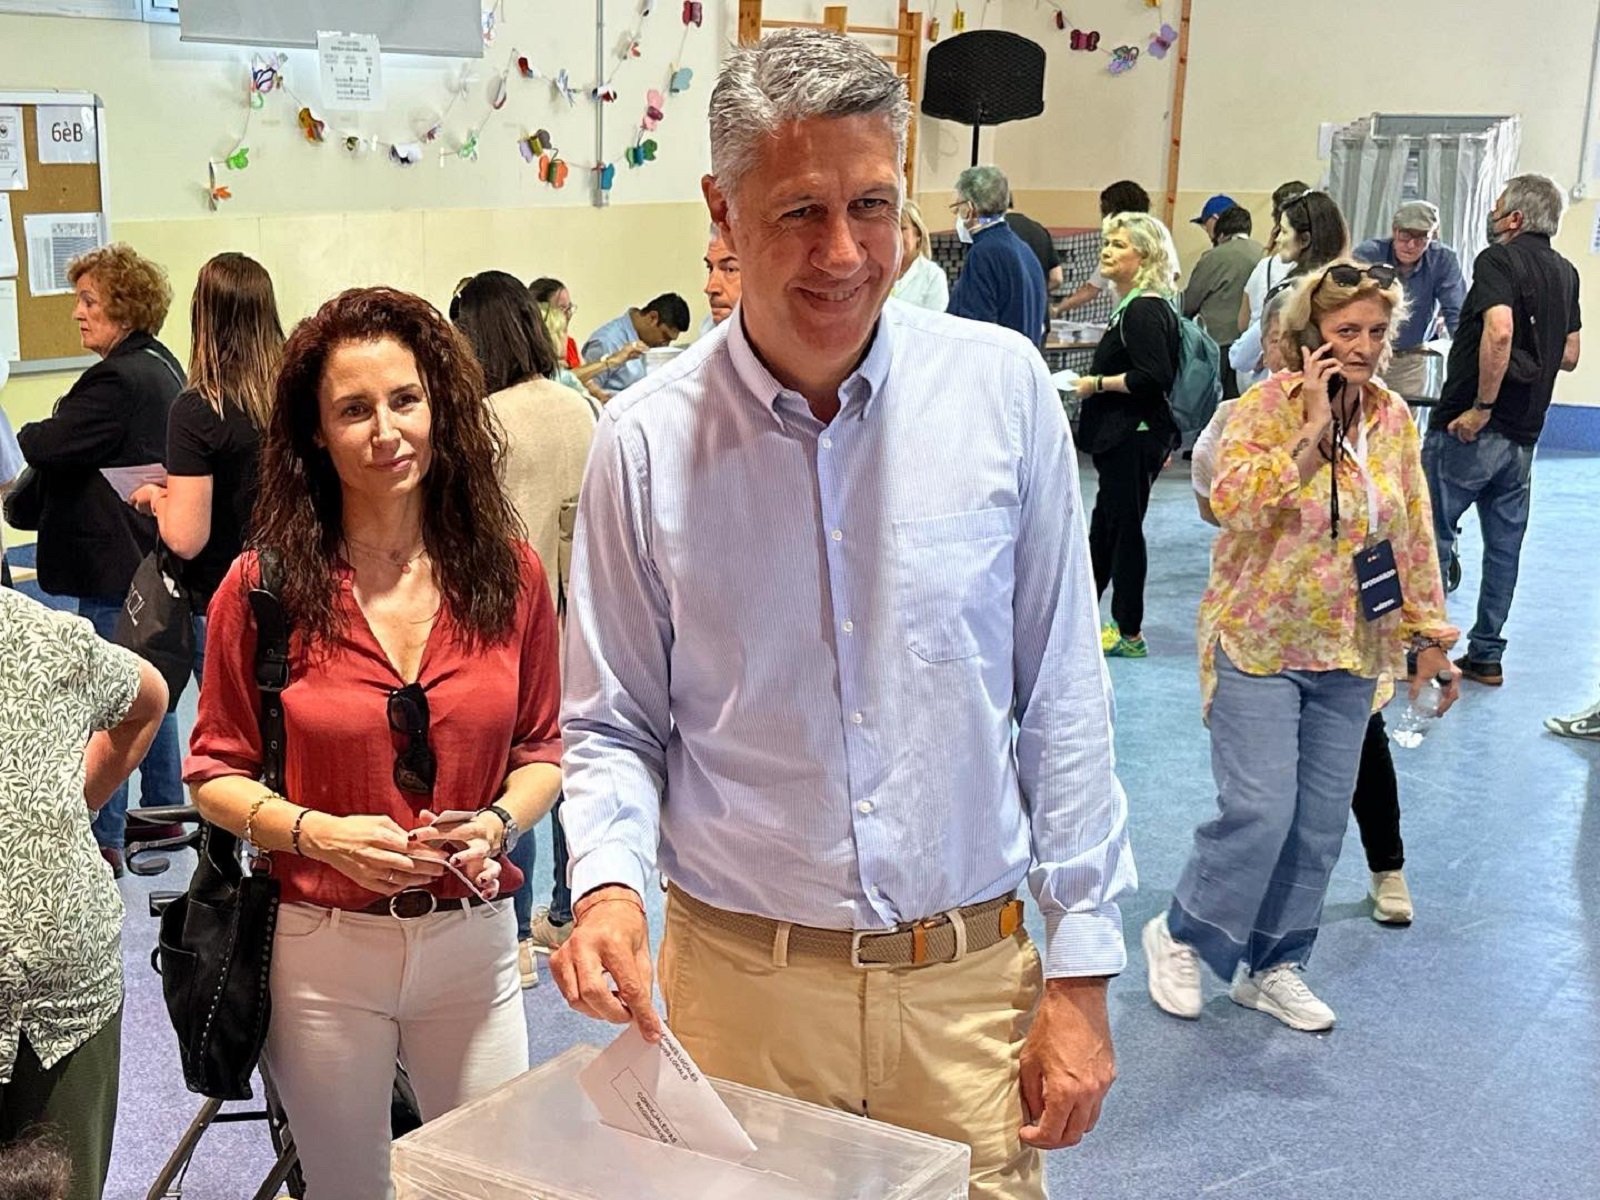 The PP's Albiol wins a crushing majority in Badalona, Catalonia's fourth largest city